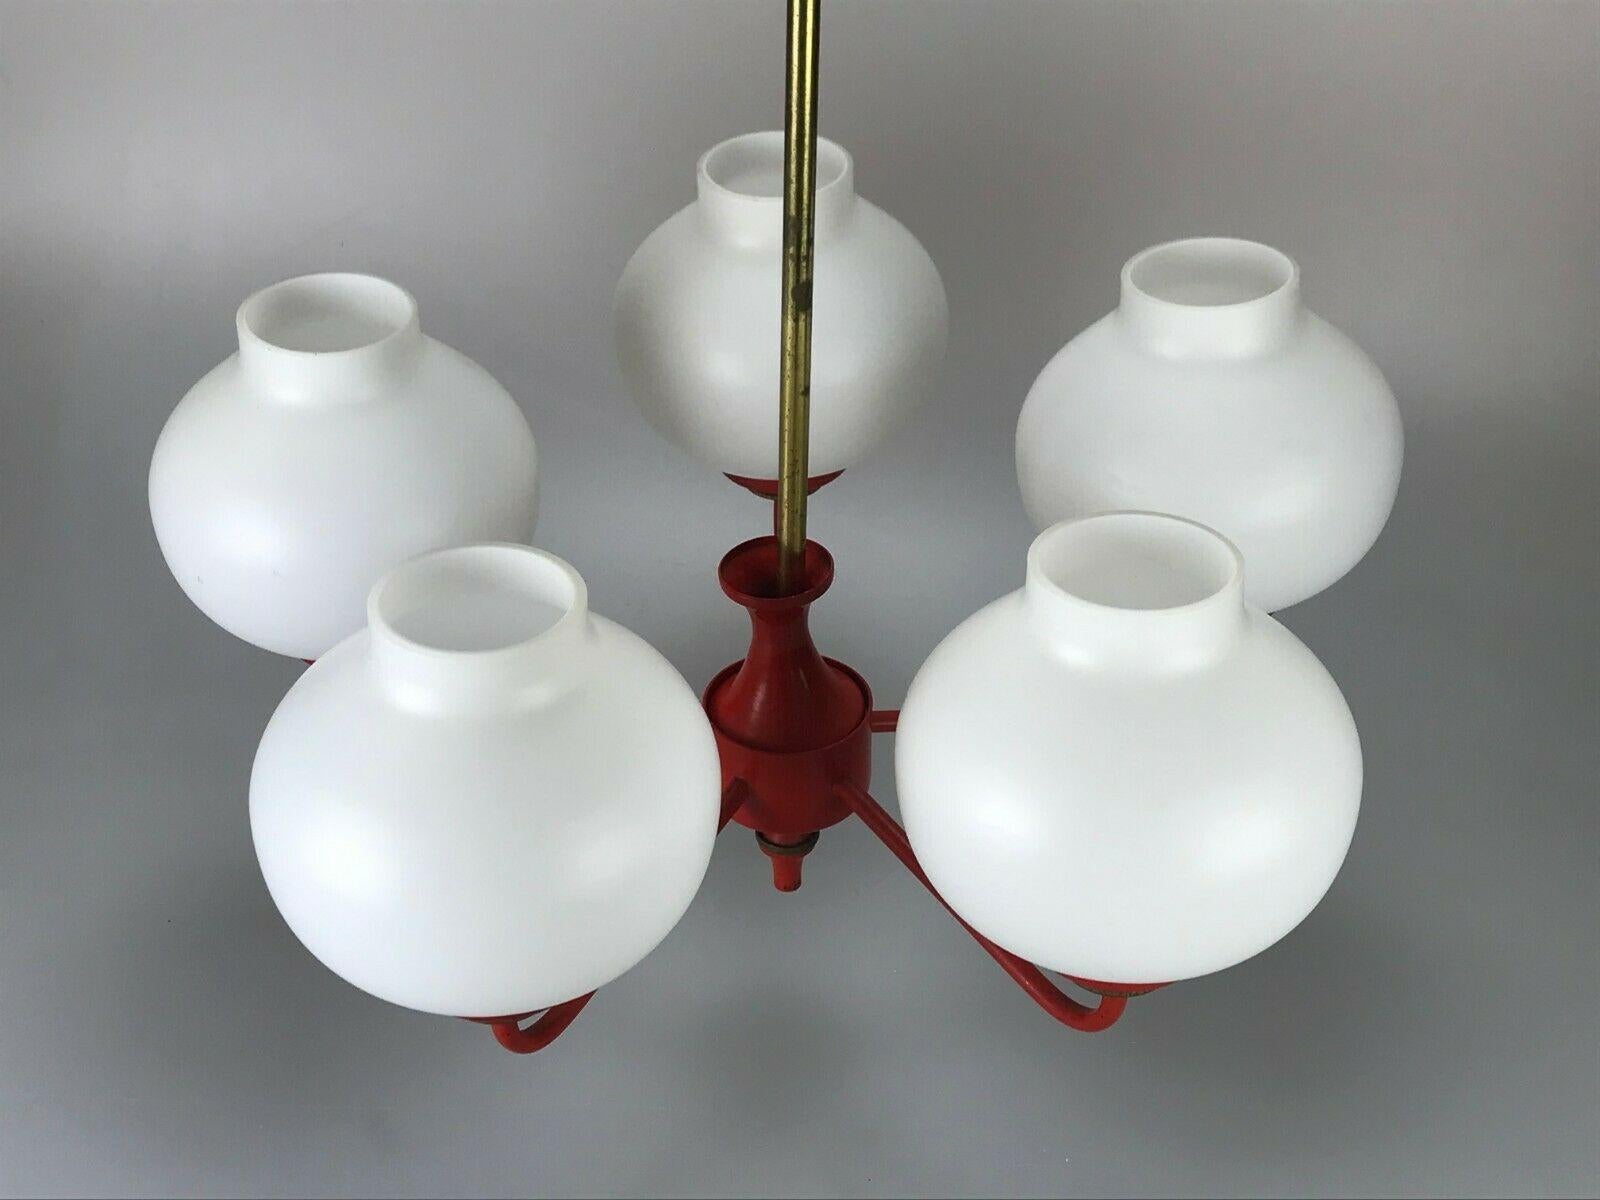 70s Lamp Light Ceiling Lamp Chandelier Ball Lamp Space Age Design In Fair Condition For Sale In Neuenkirchen, NI